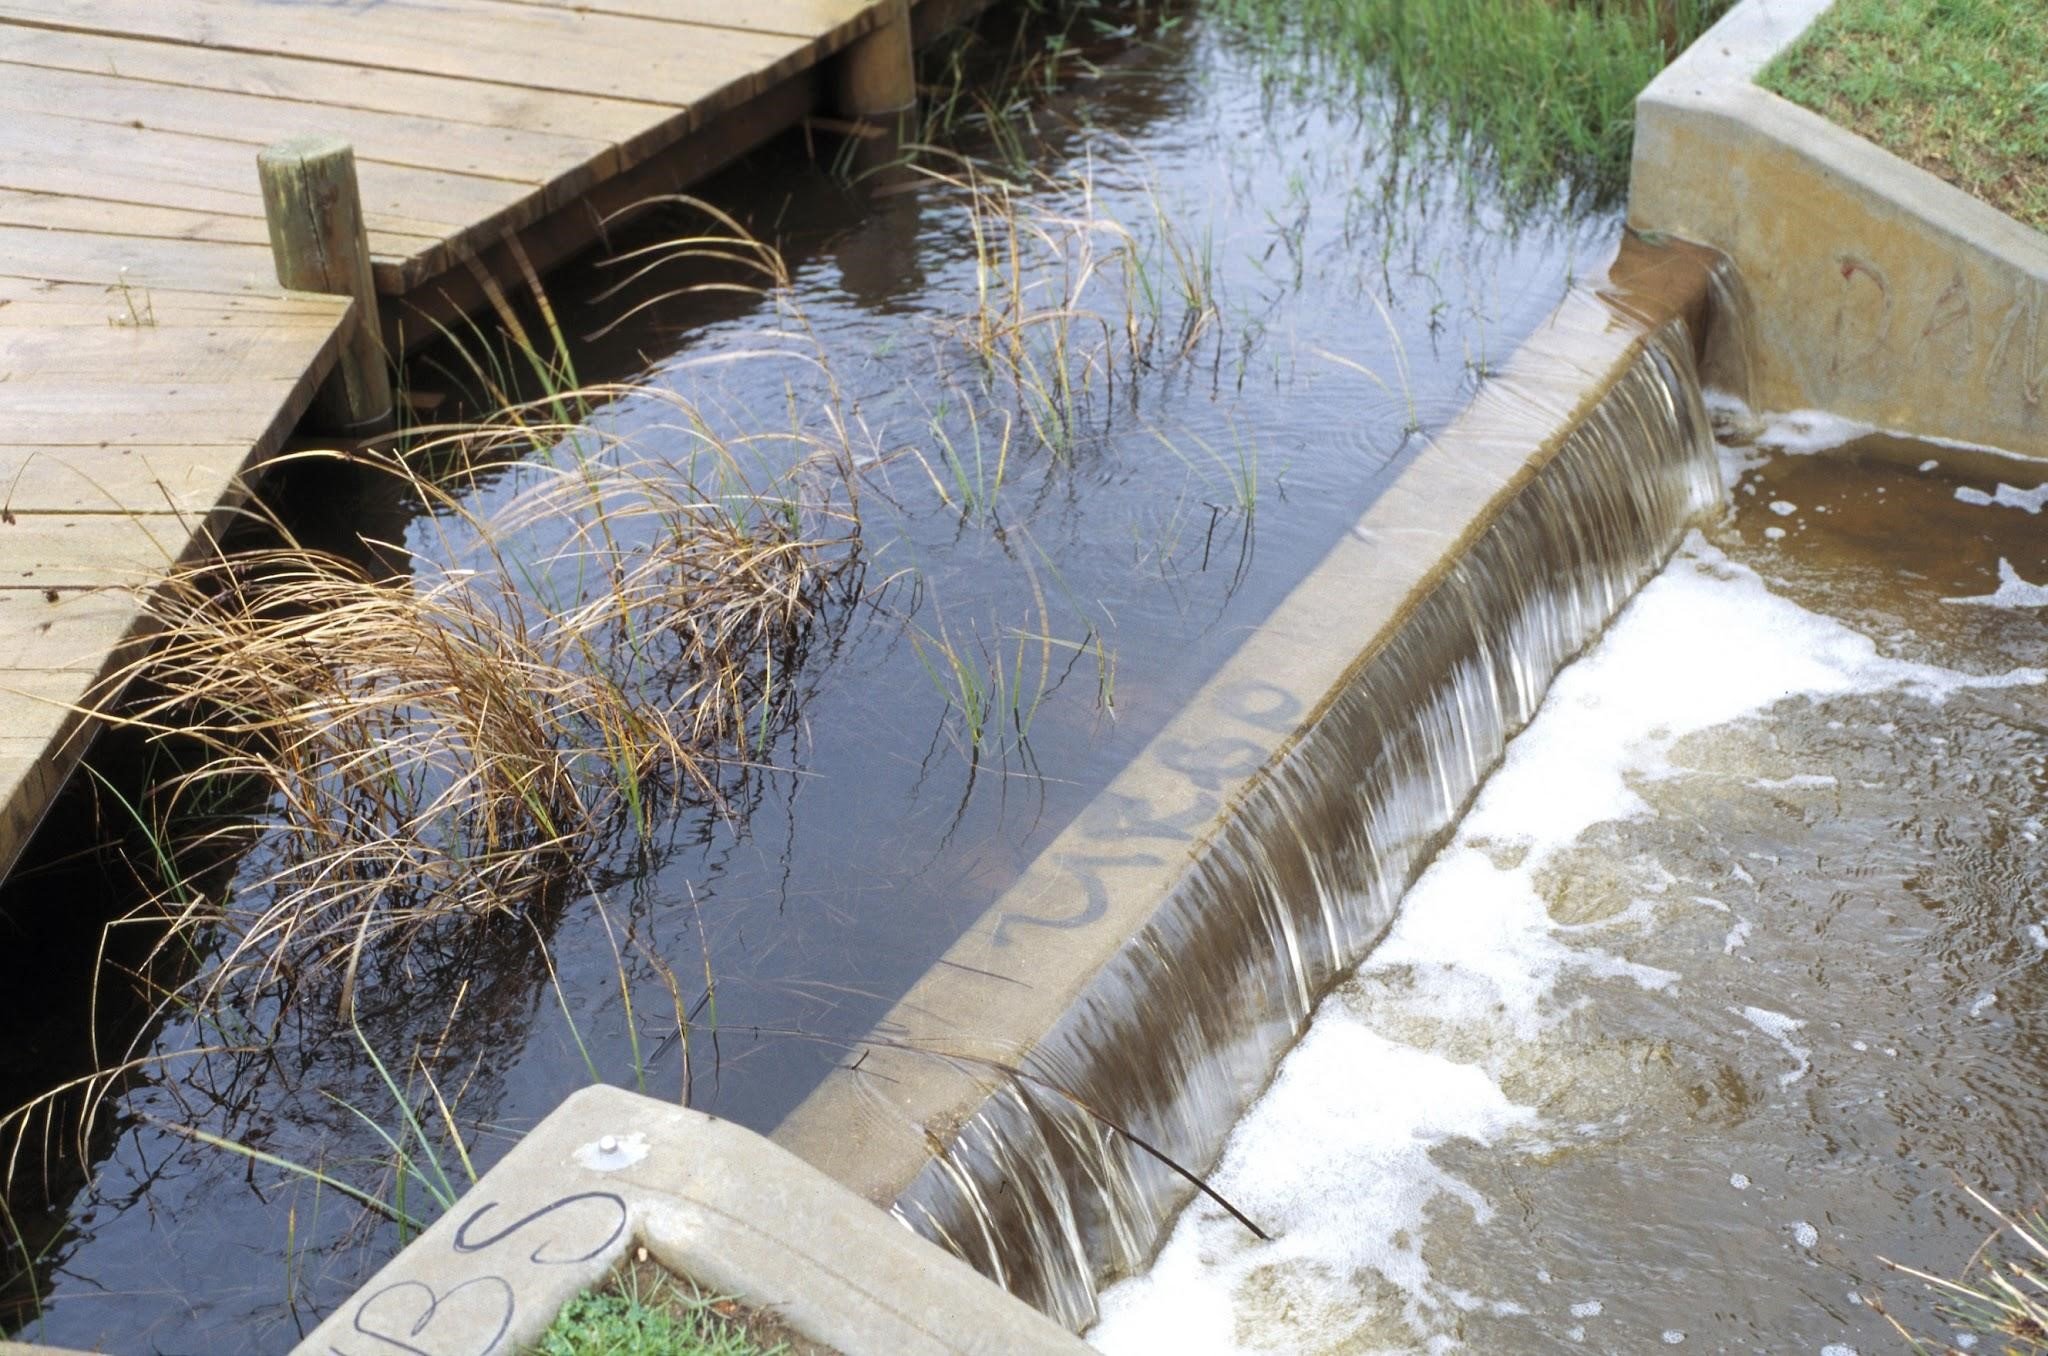 Figure 1. Stormwater runoff at the Paddocks wetland in the northern Adelaide suburb of Salisbury, Southern Australia. Credit: CSIRO/CC BY 3.0